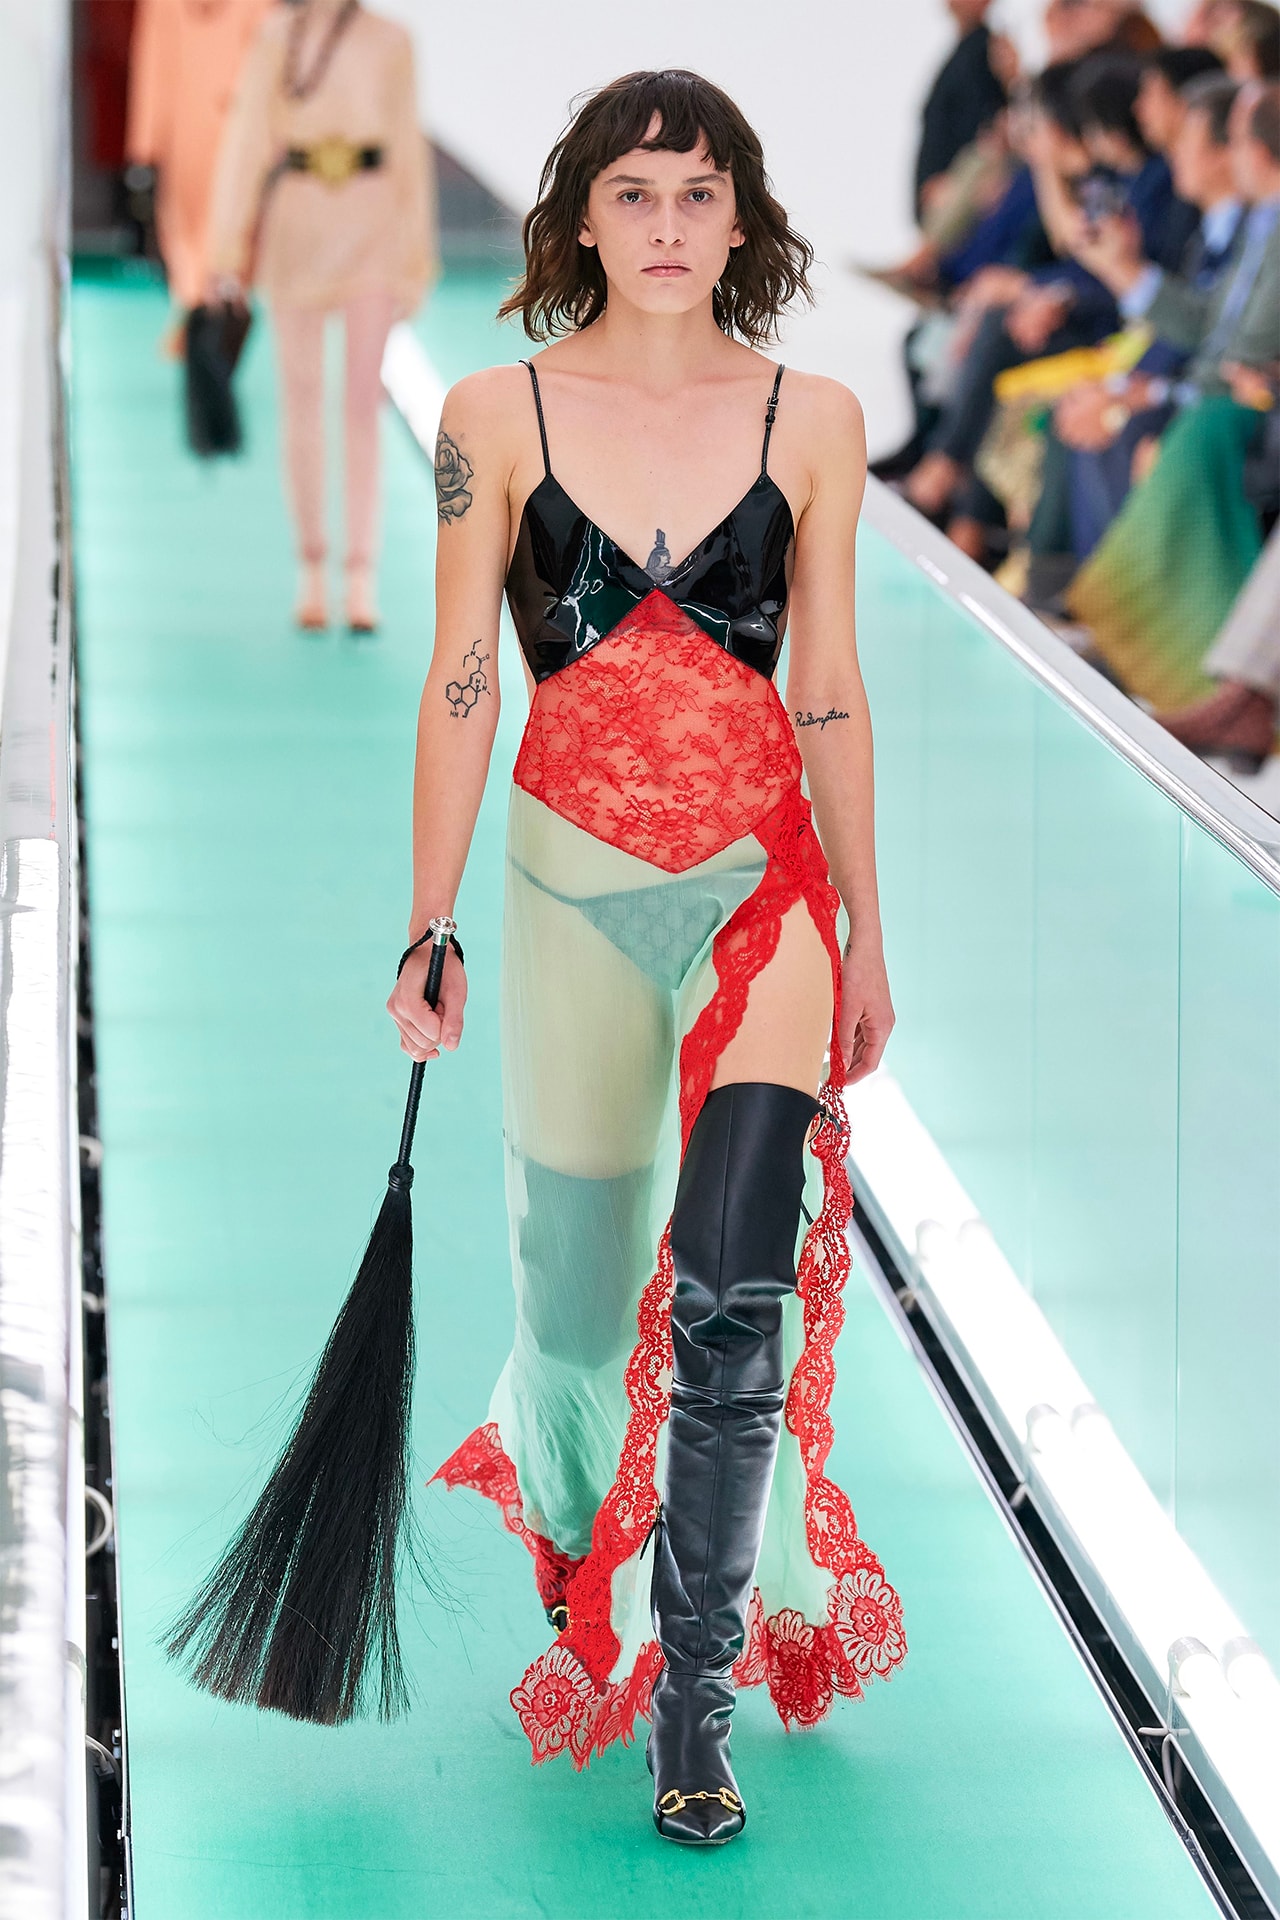 Gucci Orgasmique Spring Summer 2020 Runway Show Milan Fashion Week SS20 lace dress flogger whip boots